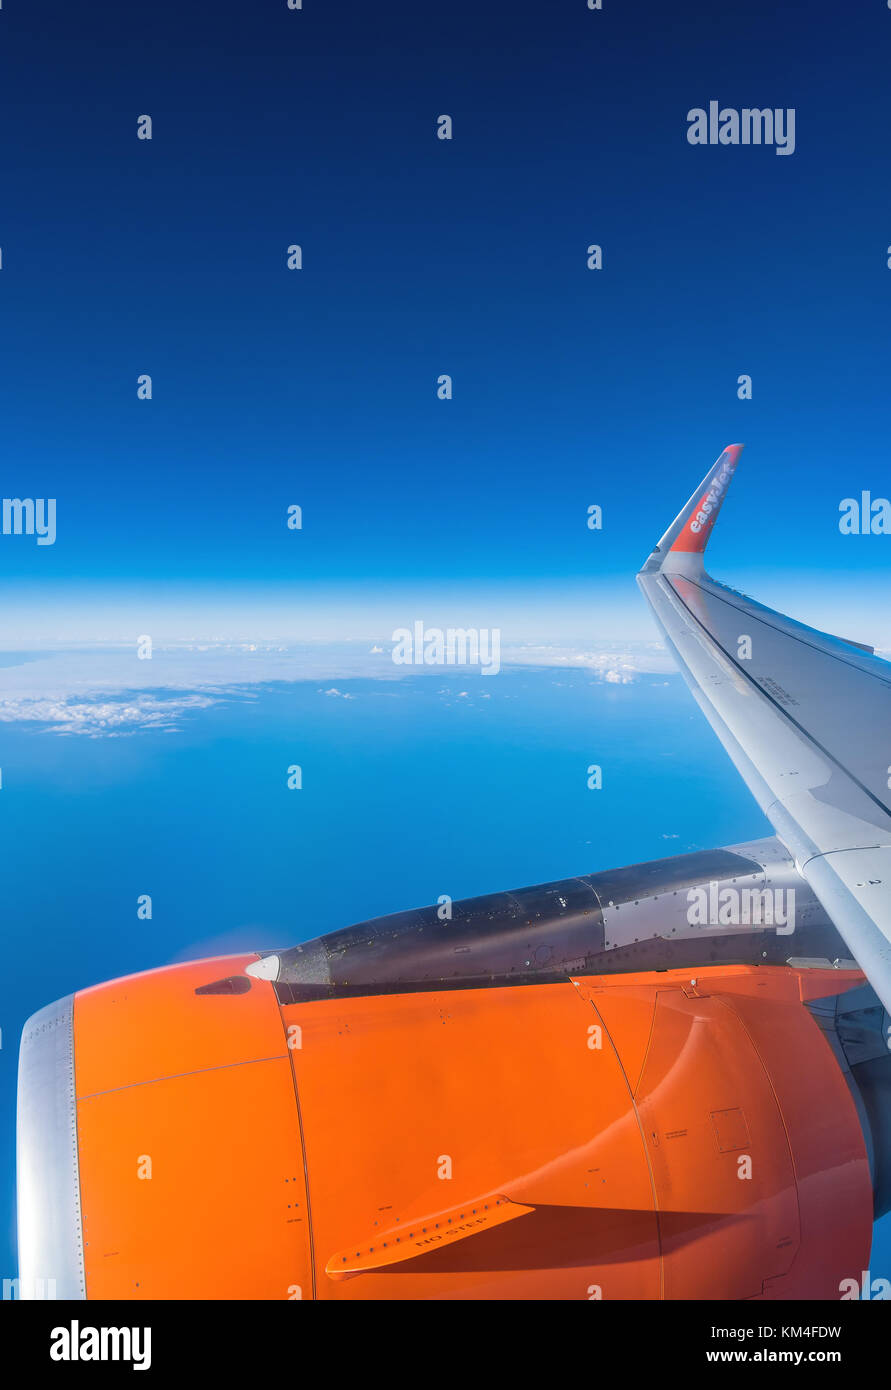 Lanzarote, Spain - December 20, 2016: easyJet logo on airplane's wing in mid-air over Atlantic Ocean. easyJet is a British low-cost airline Stock Photo